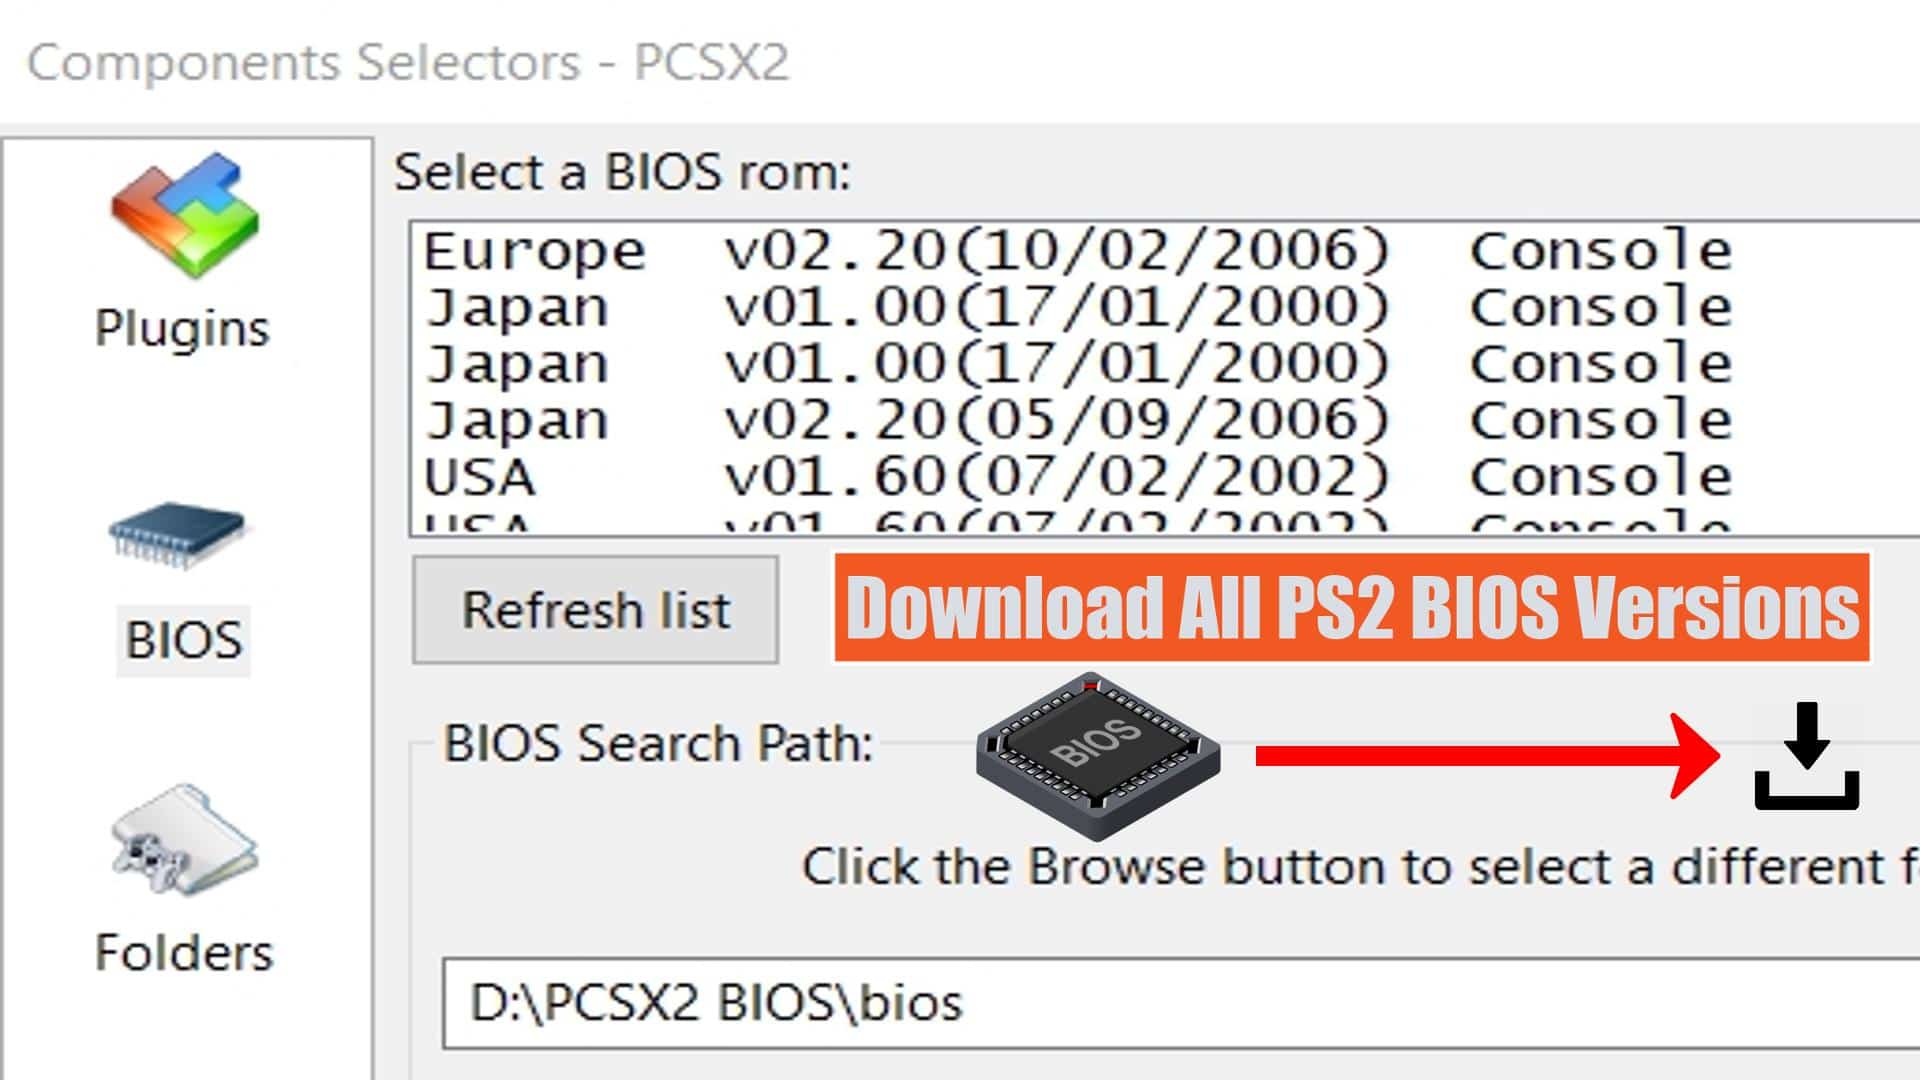 ps2 bios download for pcsx2 1.2.1